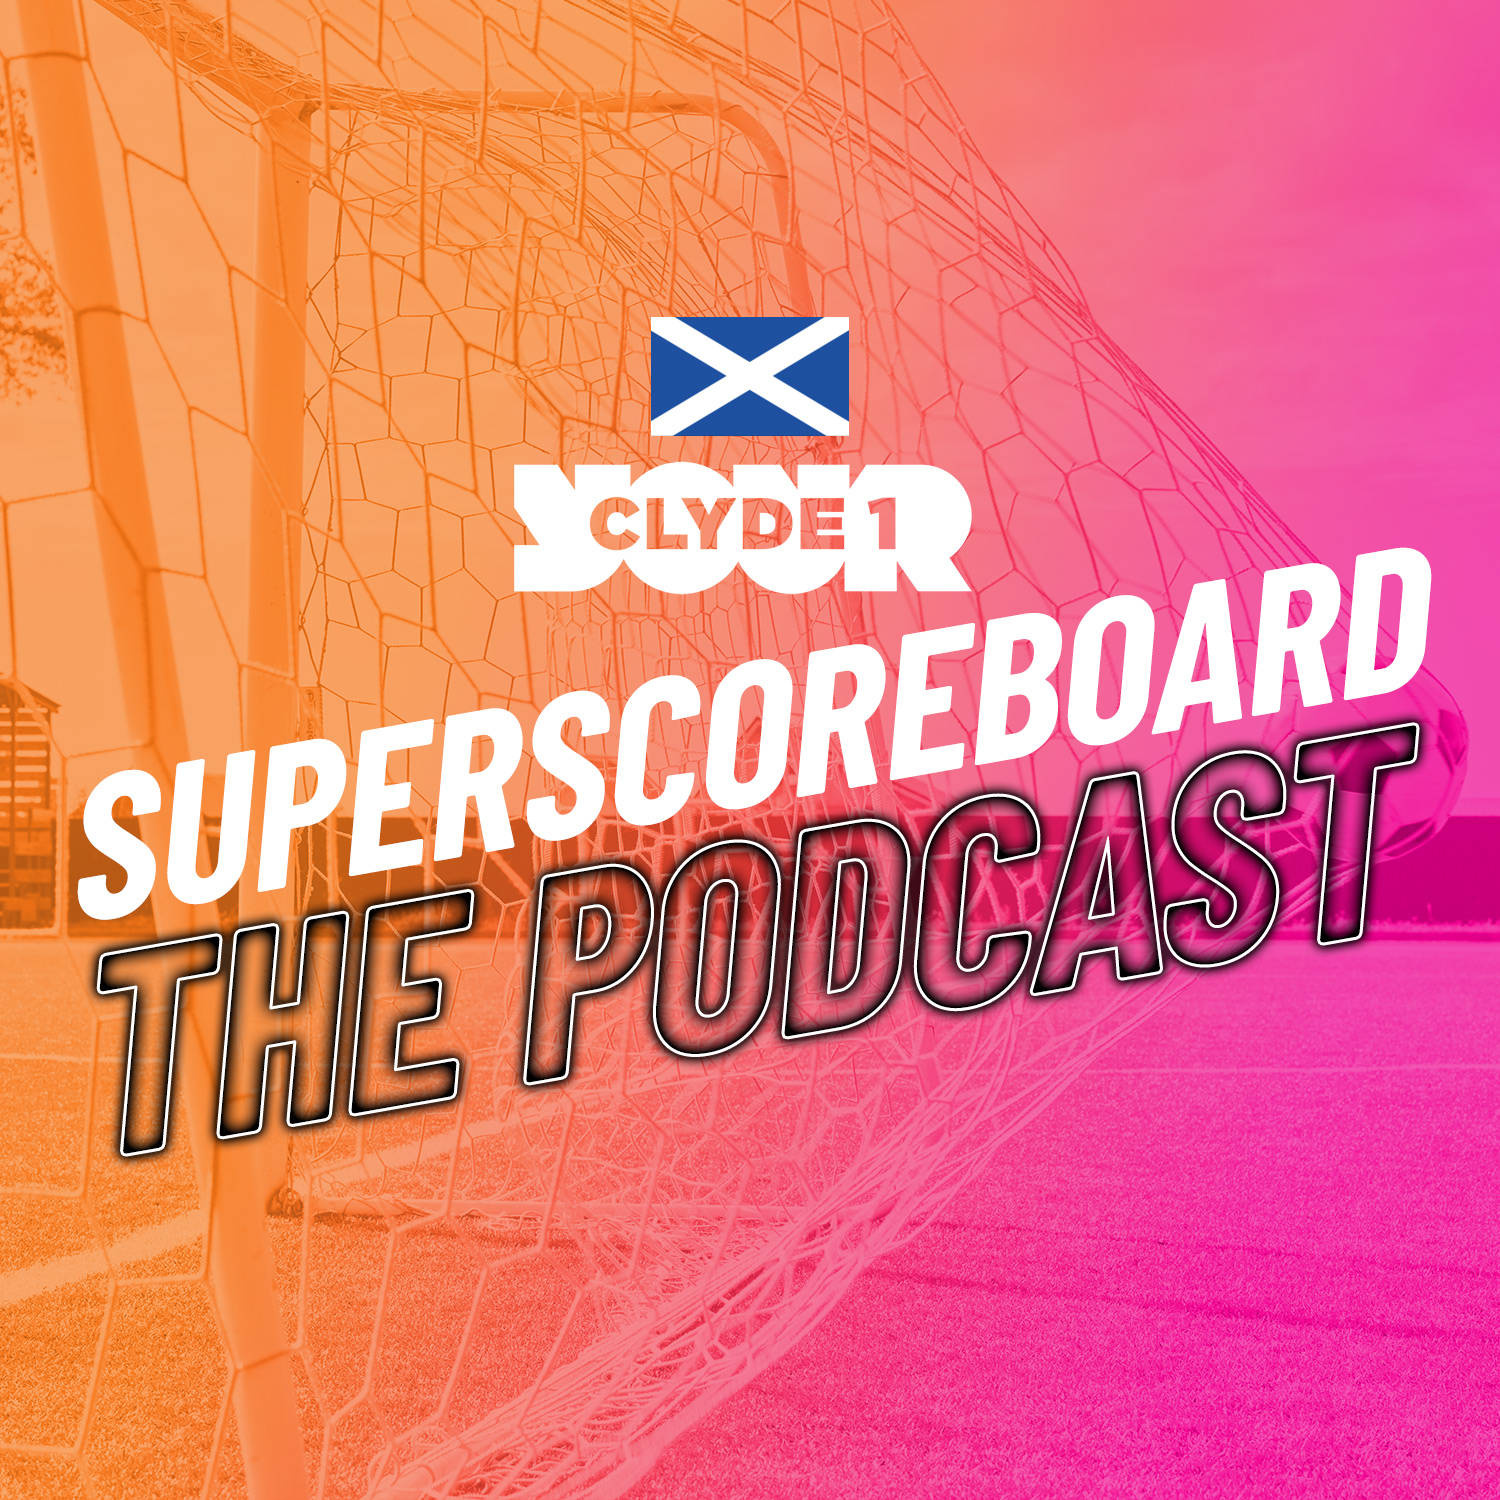 Sunday 28th April Clyde 1 Superscoreboard – Part 2